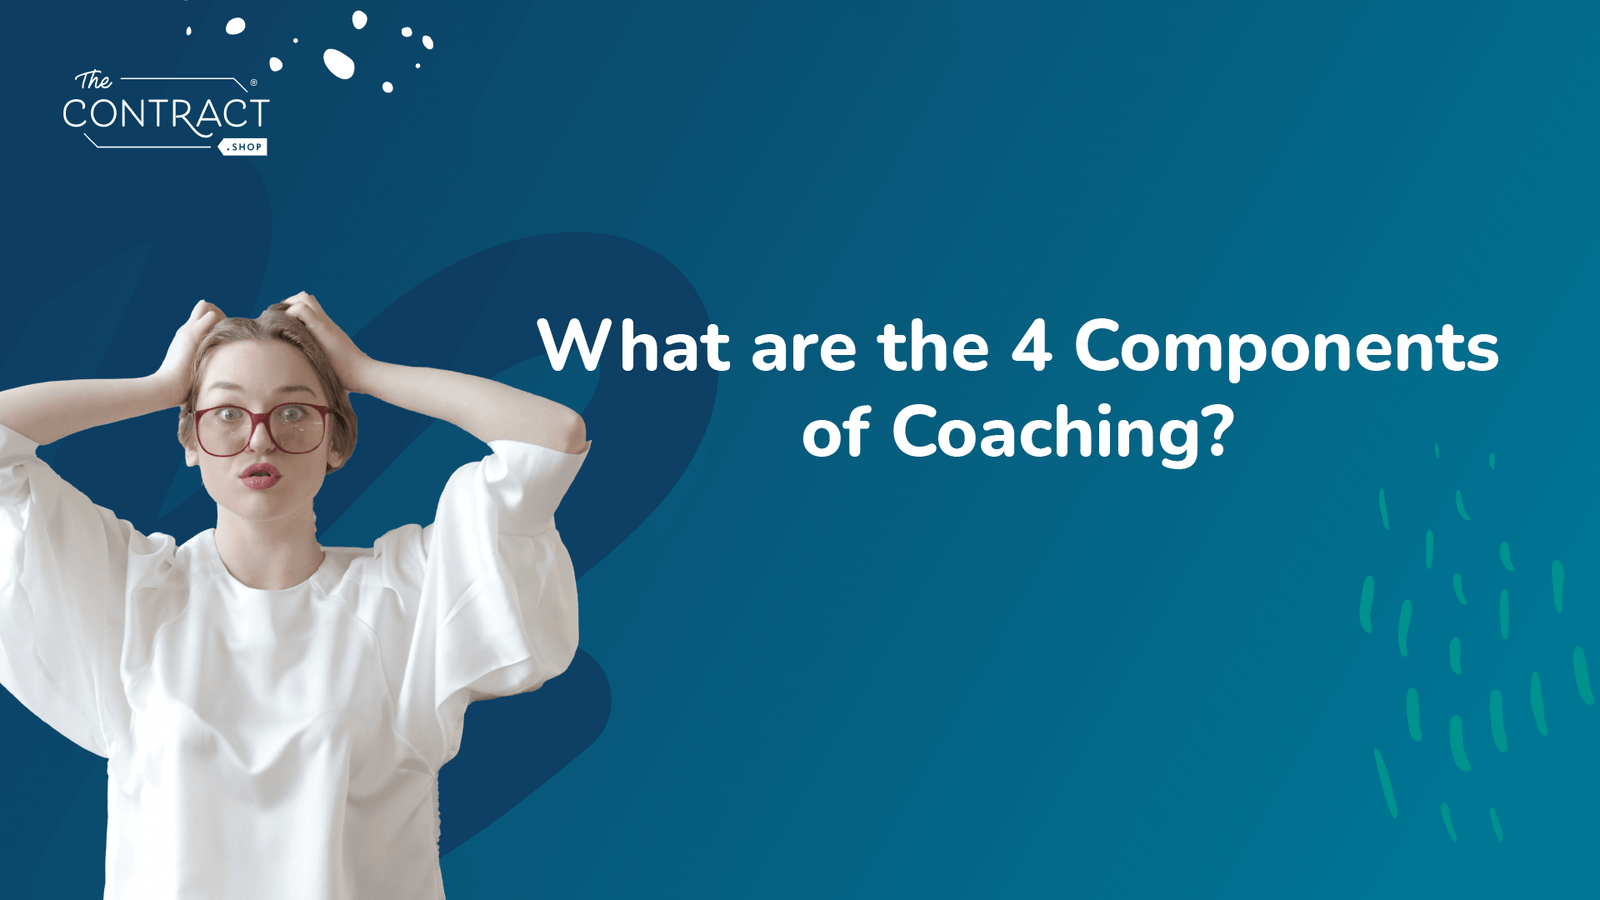 5.What are the 4 Components of Coaching